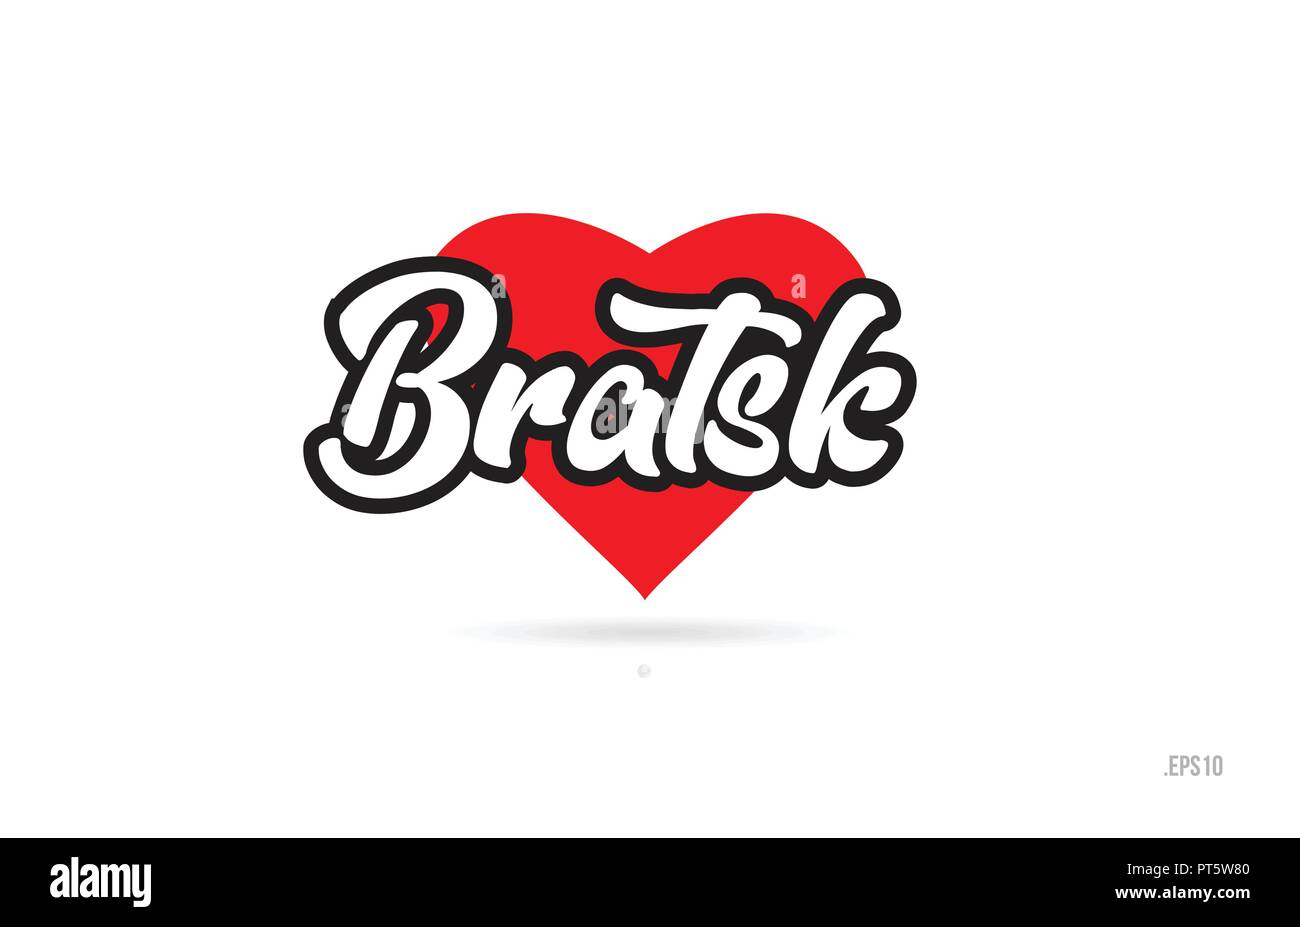 bratsk city text design with red heart typographic icon design suitable for touristic promotion Stock Vector